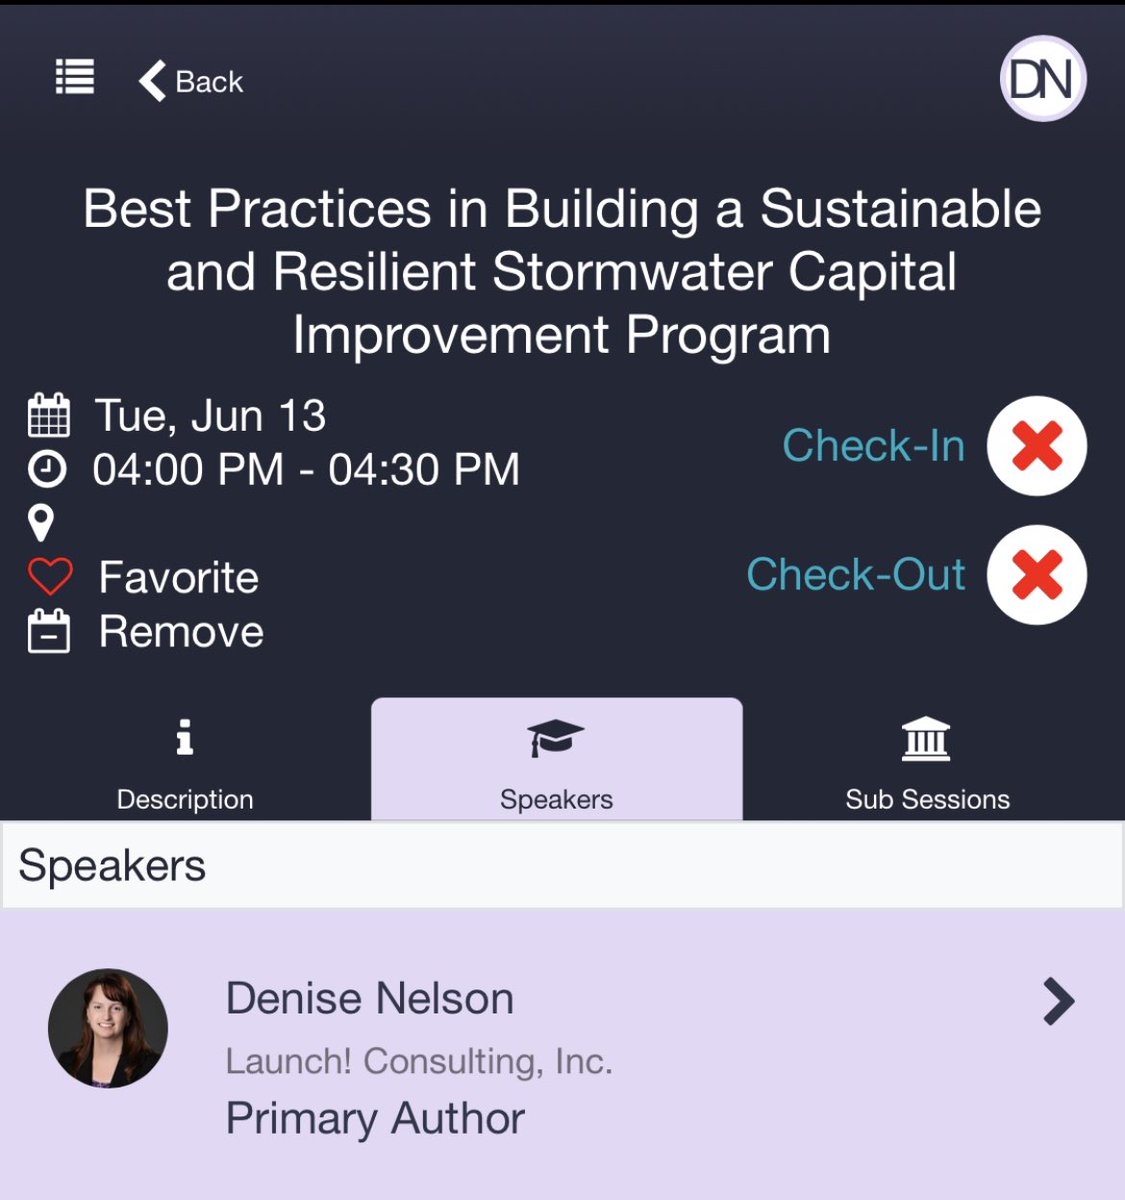 Join me in-person or virtually at #ACE23 Tuesday afternoon for “Best Practices in Building a #Sustainable and #Resilient #Stormwater Capital Improvement Program! #CIP #FloodResiliencePlan